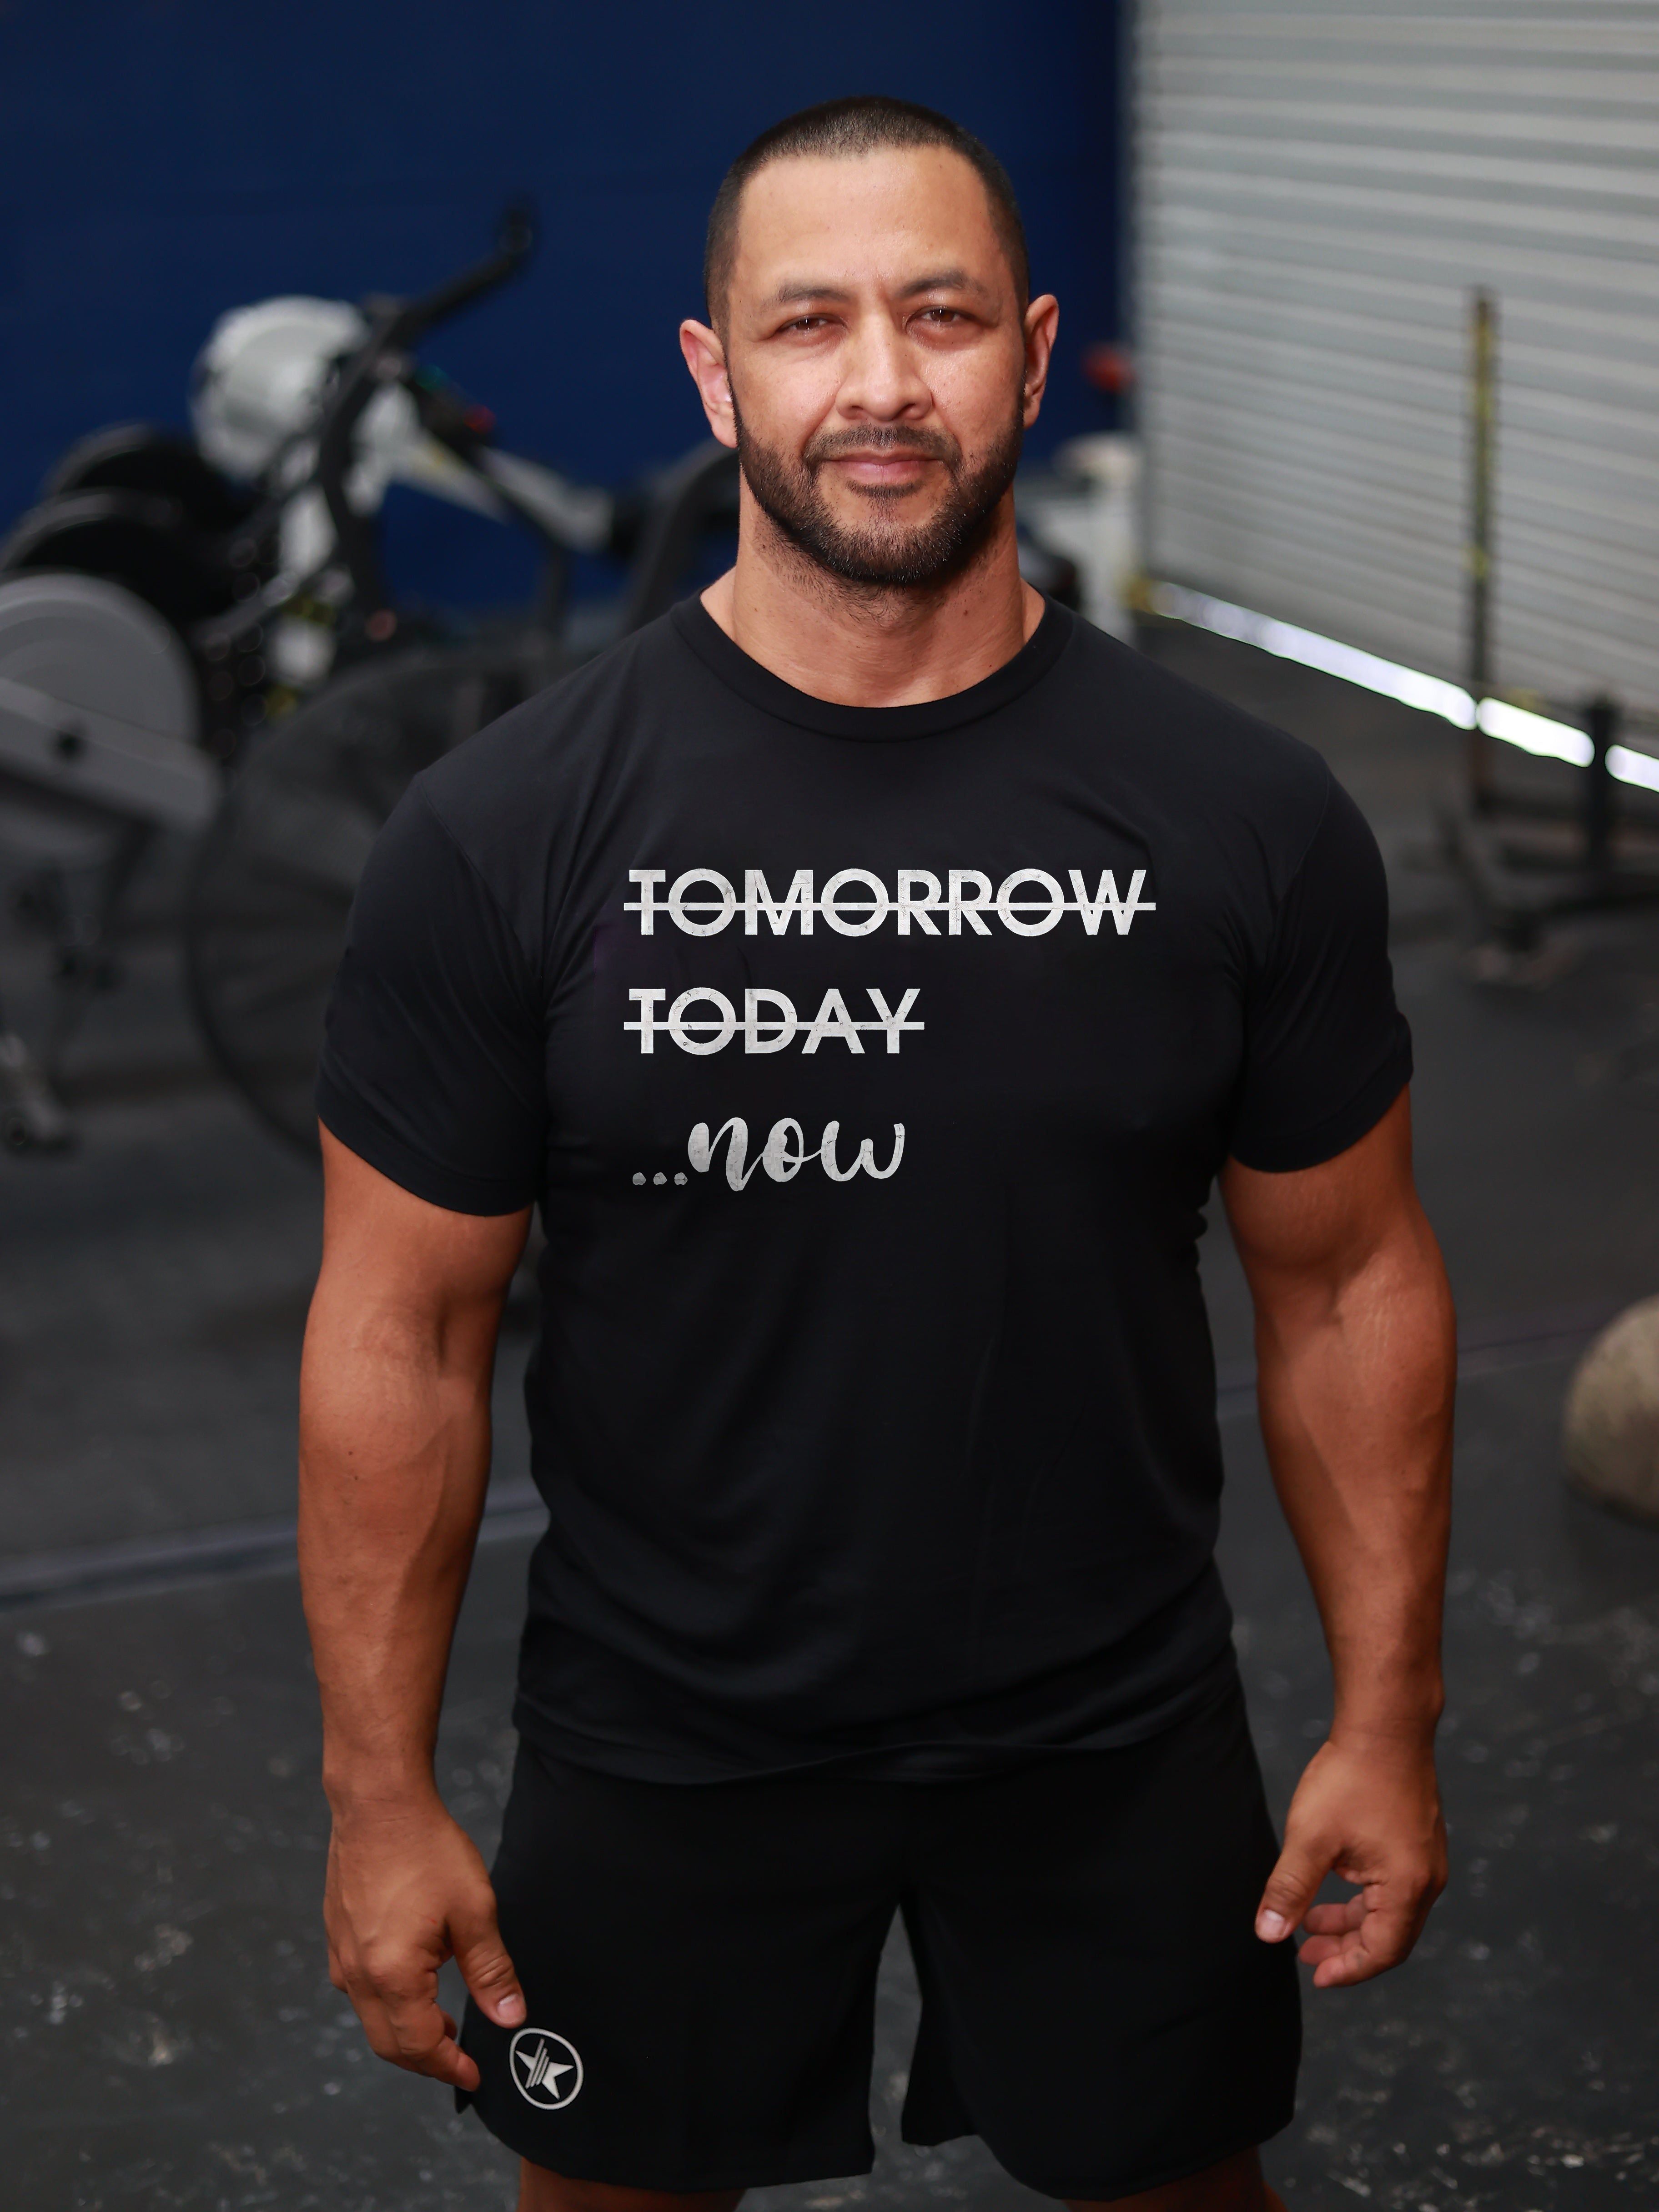 Tomorrow Today ...Now Printed Men's T-shirt